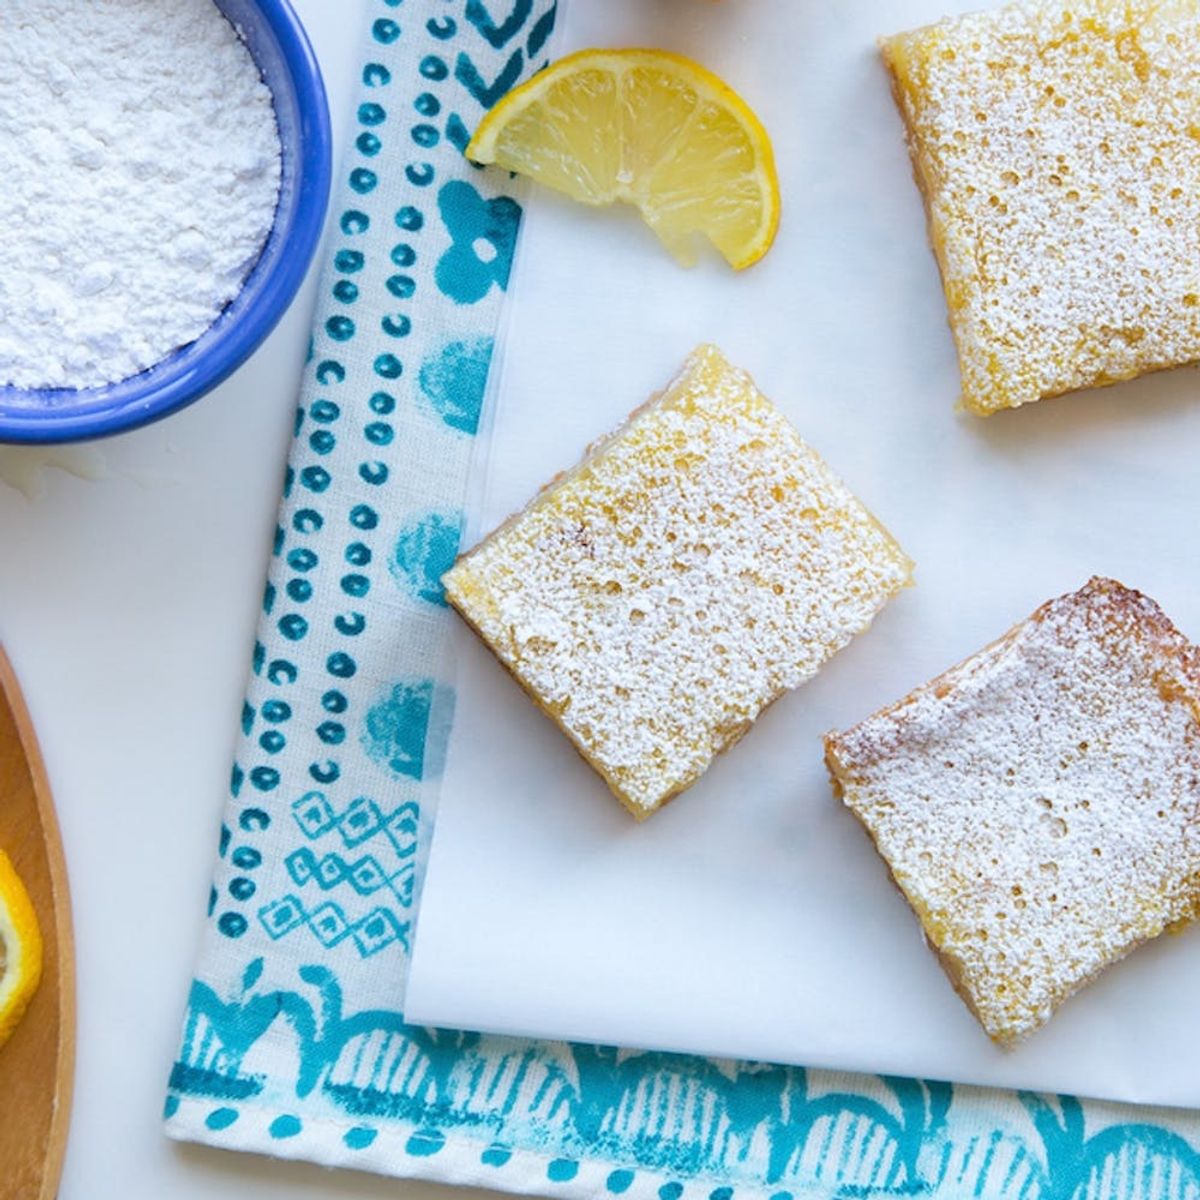 You Won’t Miss Flour With These Gluten-Free Lemon Squares